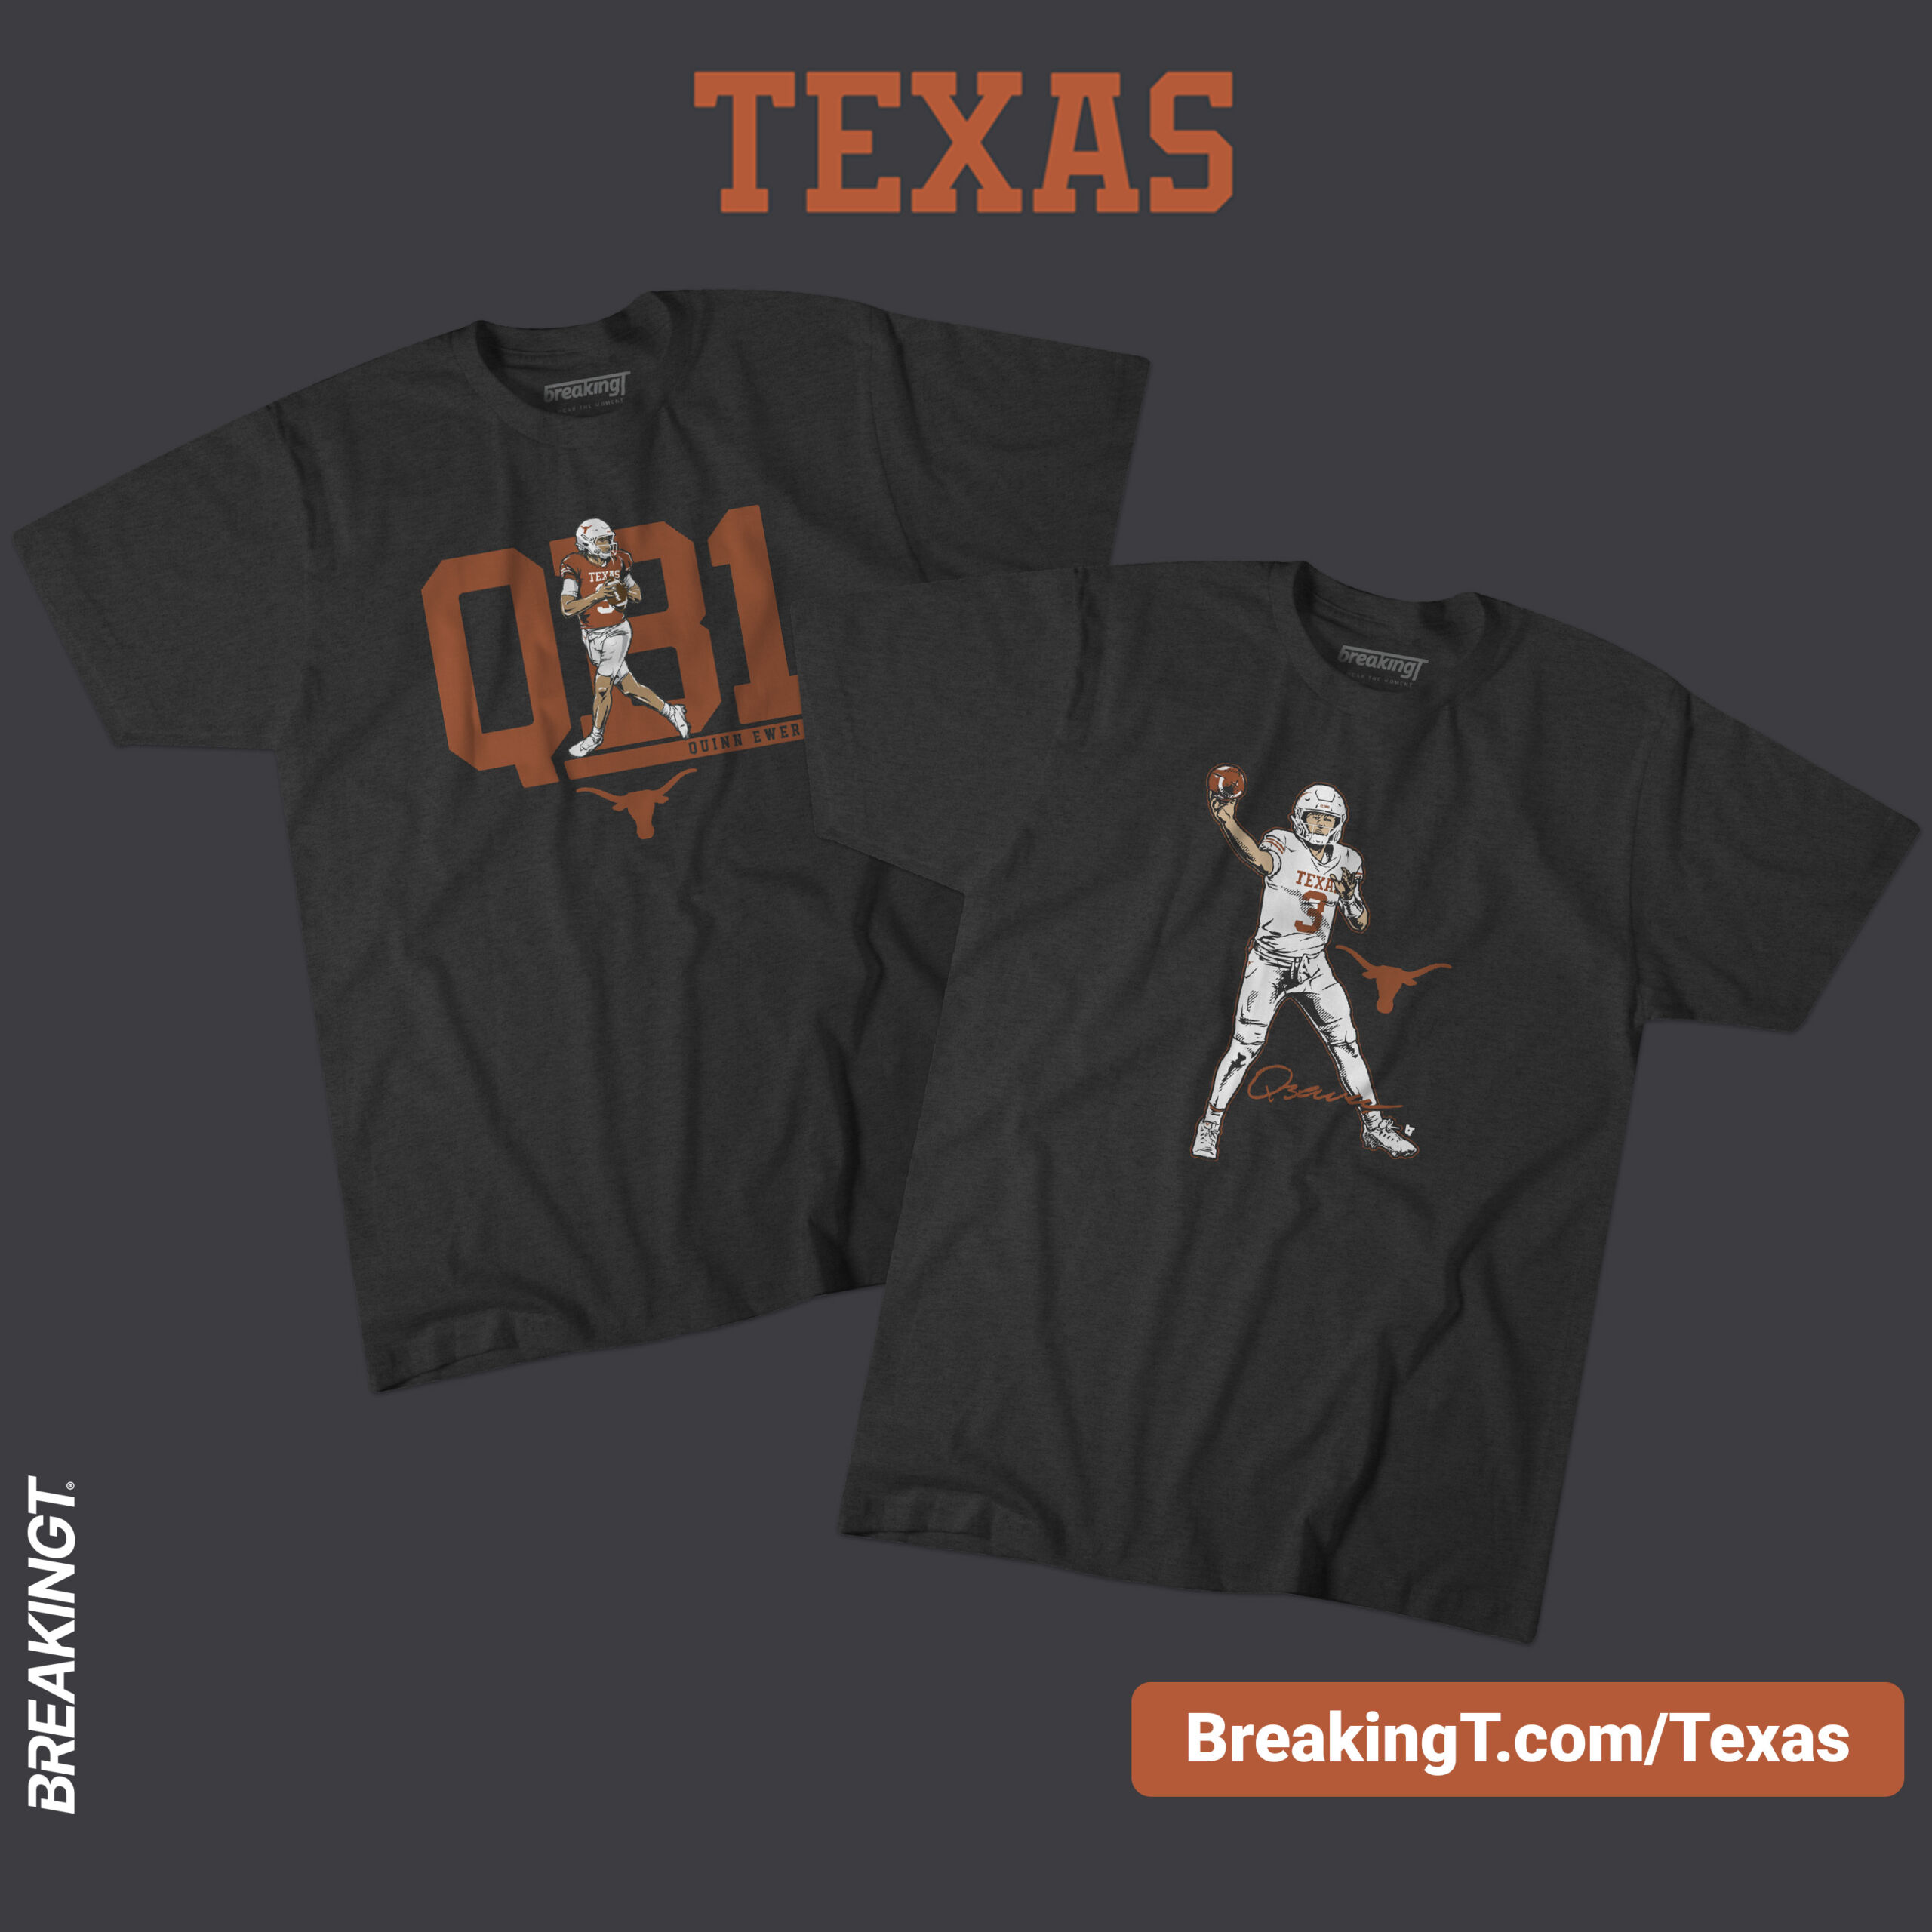 These are the Astros shirts that will make your friends jealous